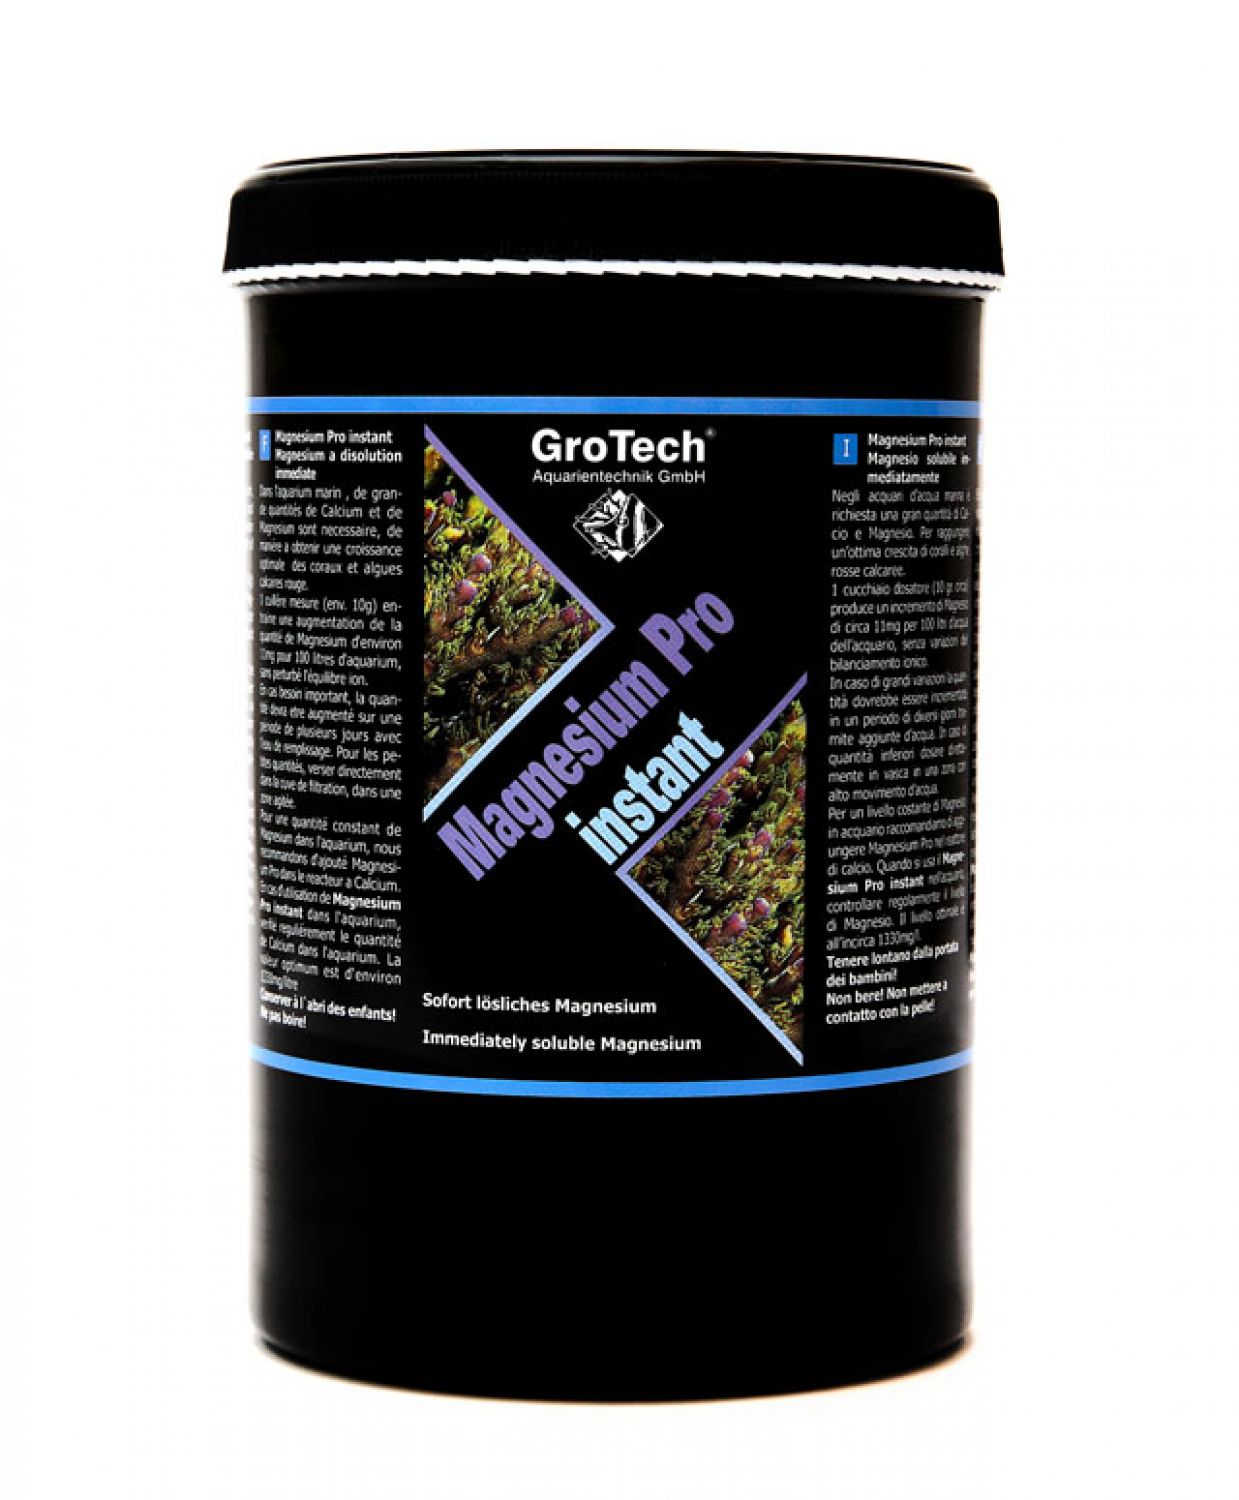 GroTech Magnesium pro instant 1000 g-Dose